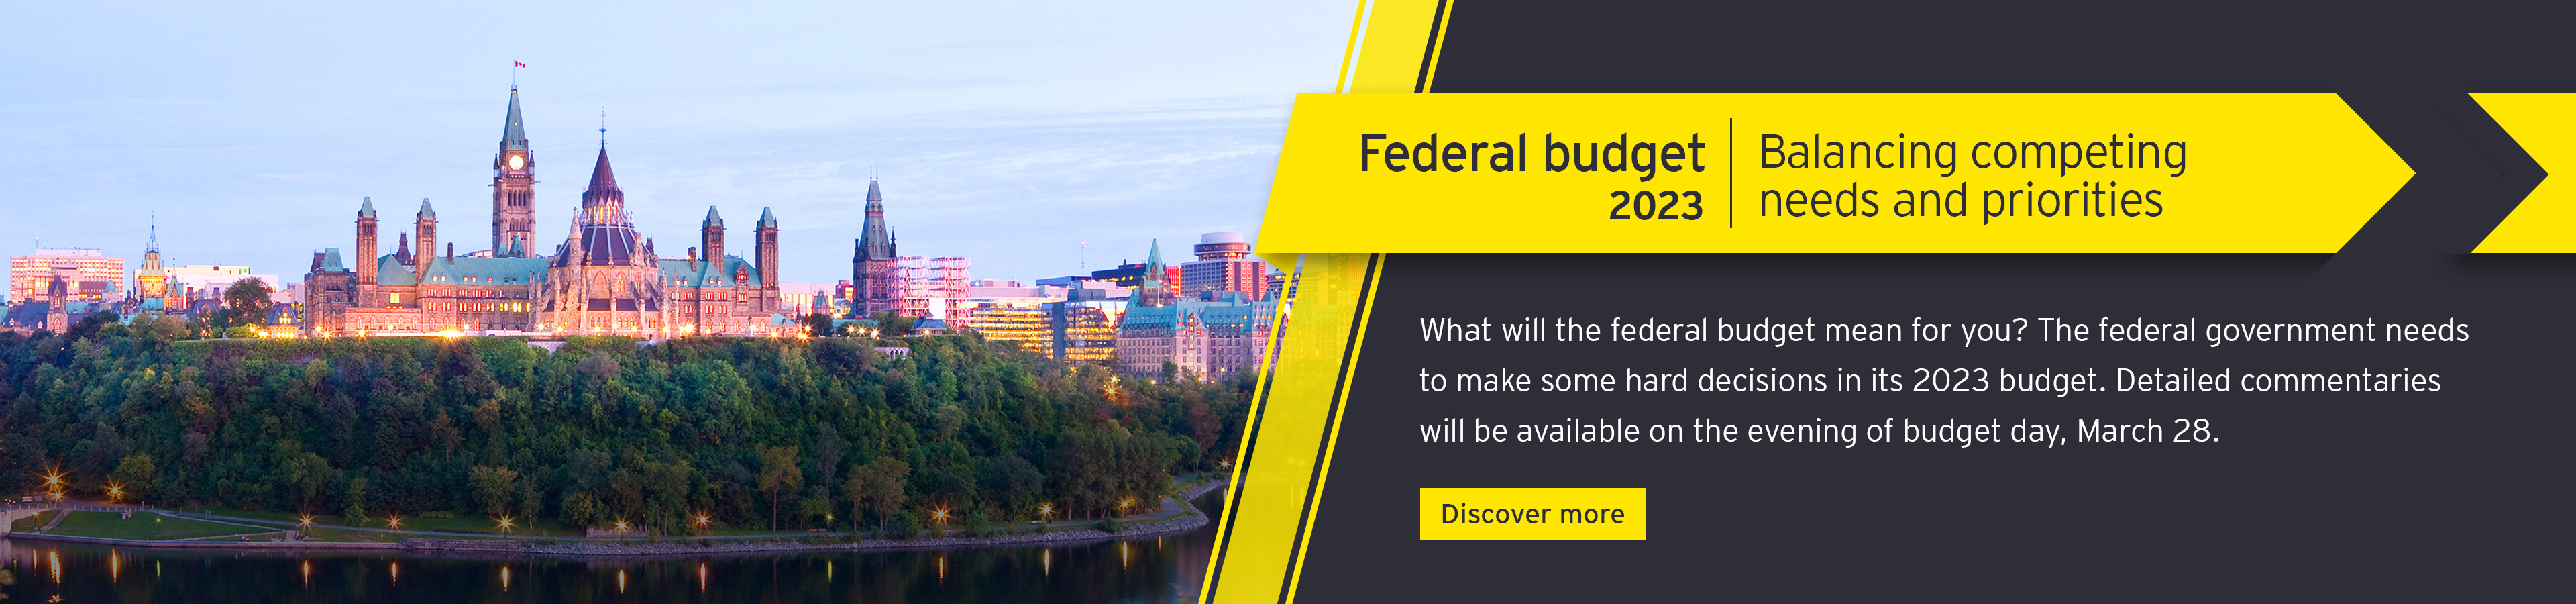 Federal Budget 2023 - Balancing competing needs and priorities  Discover more